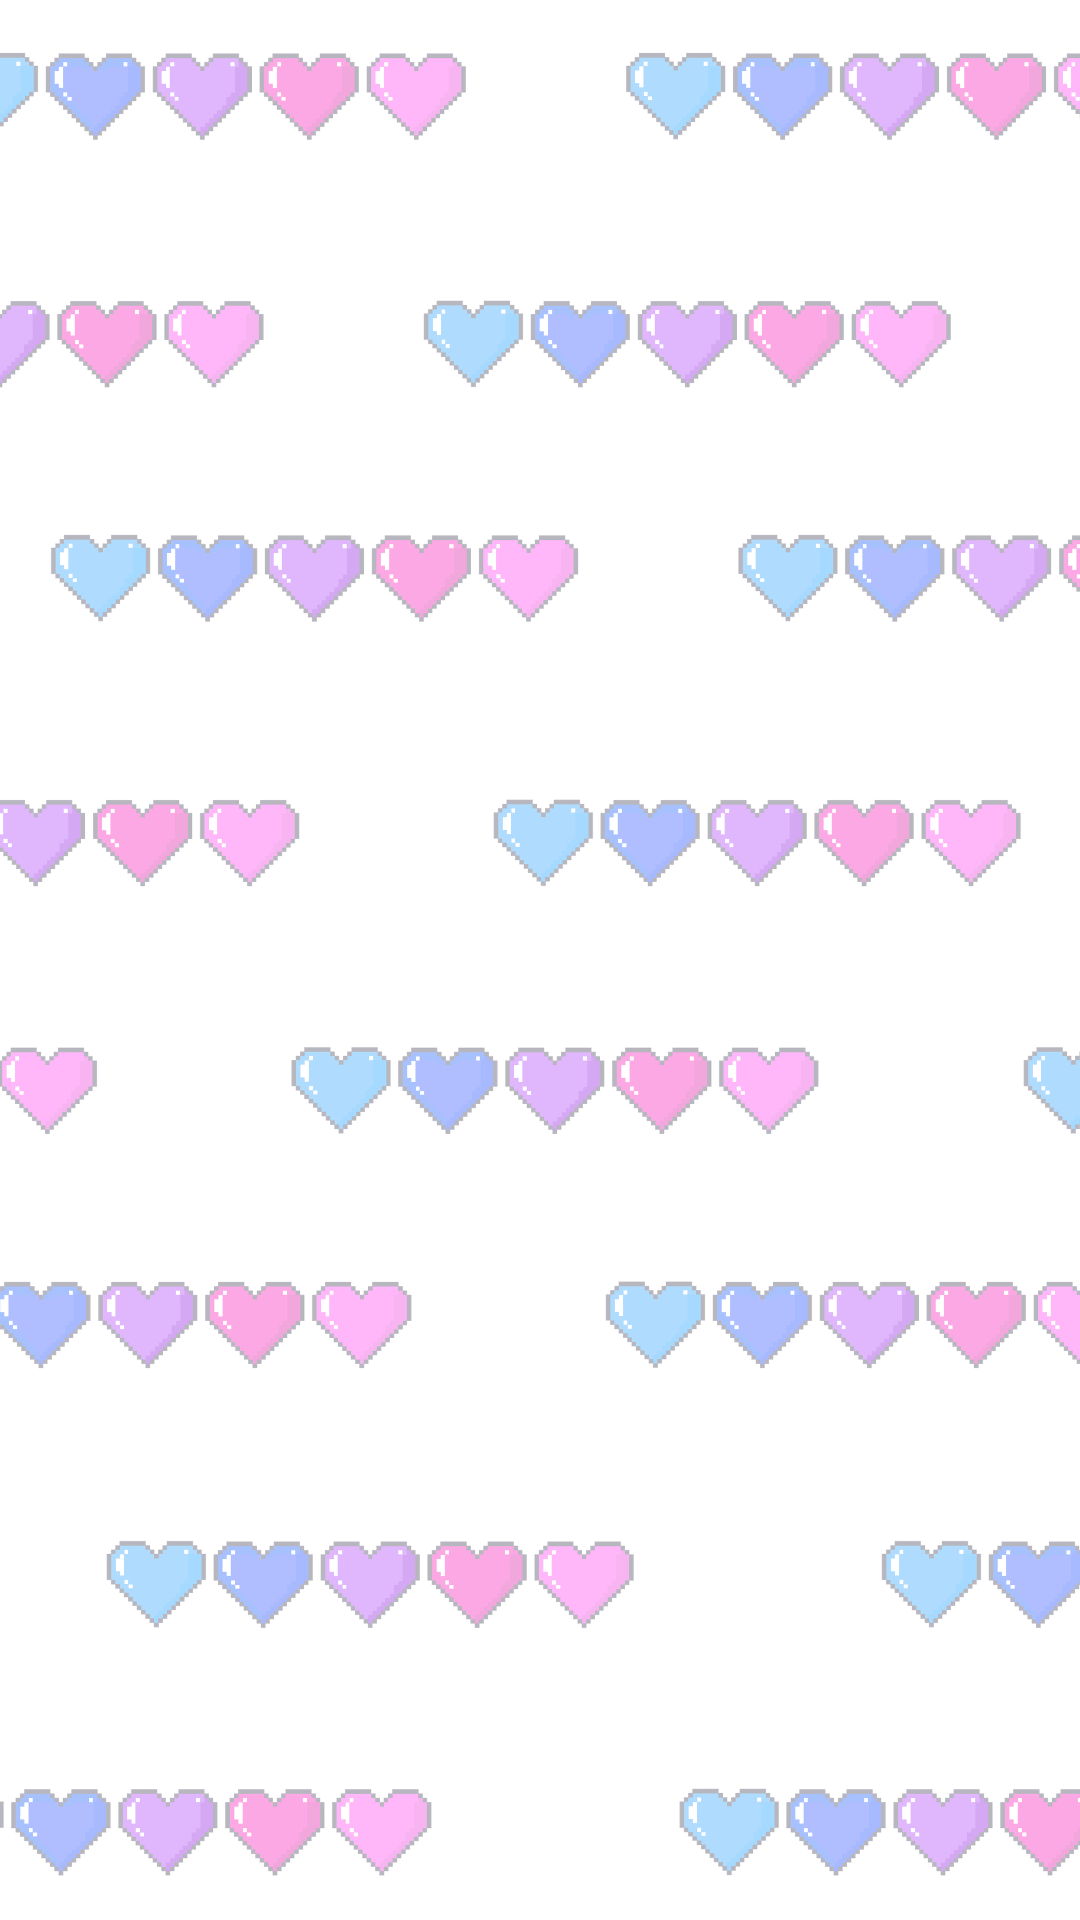 A pattern of pink, blue and purple hearts on a white background - Bisexual